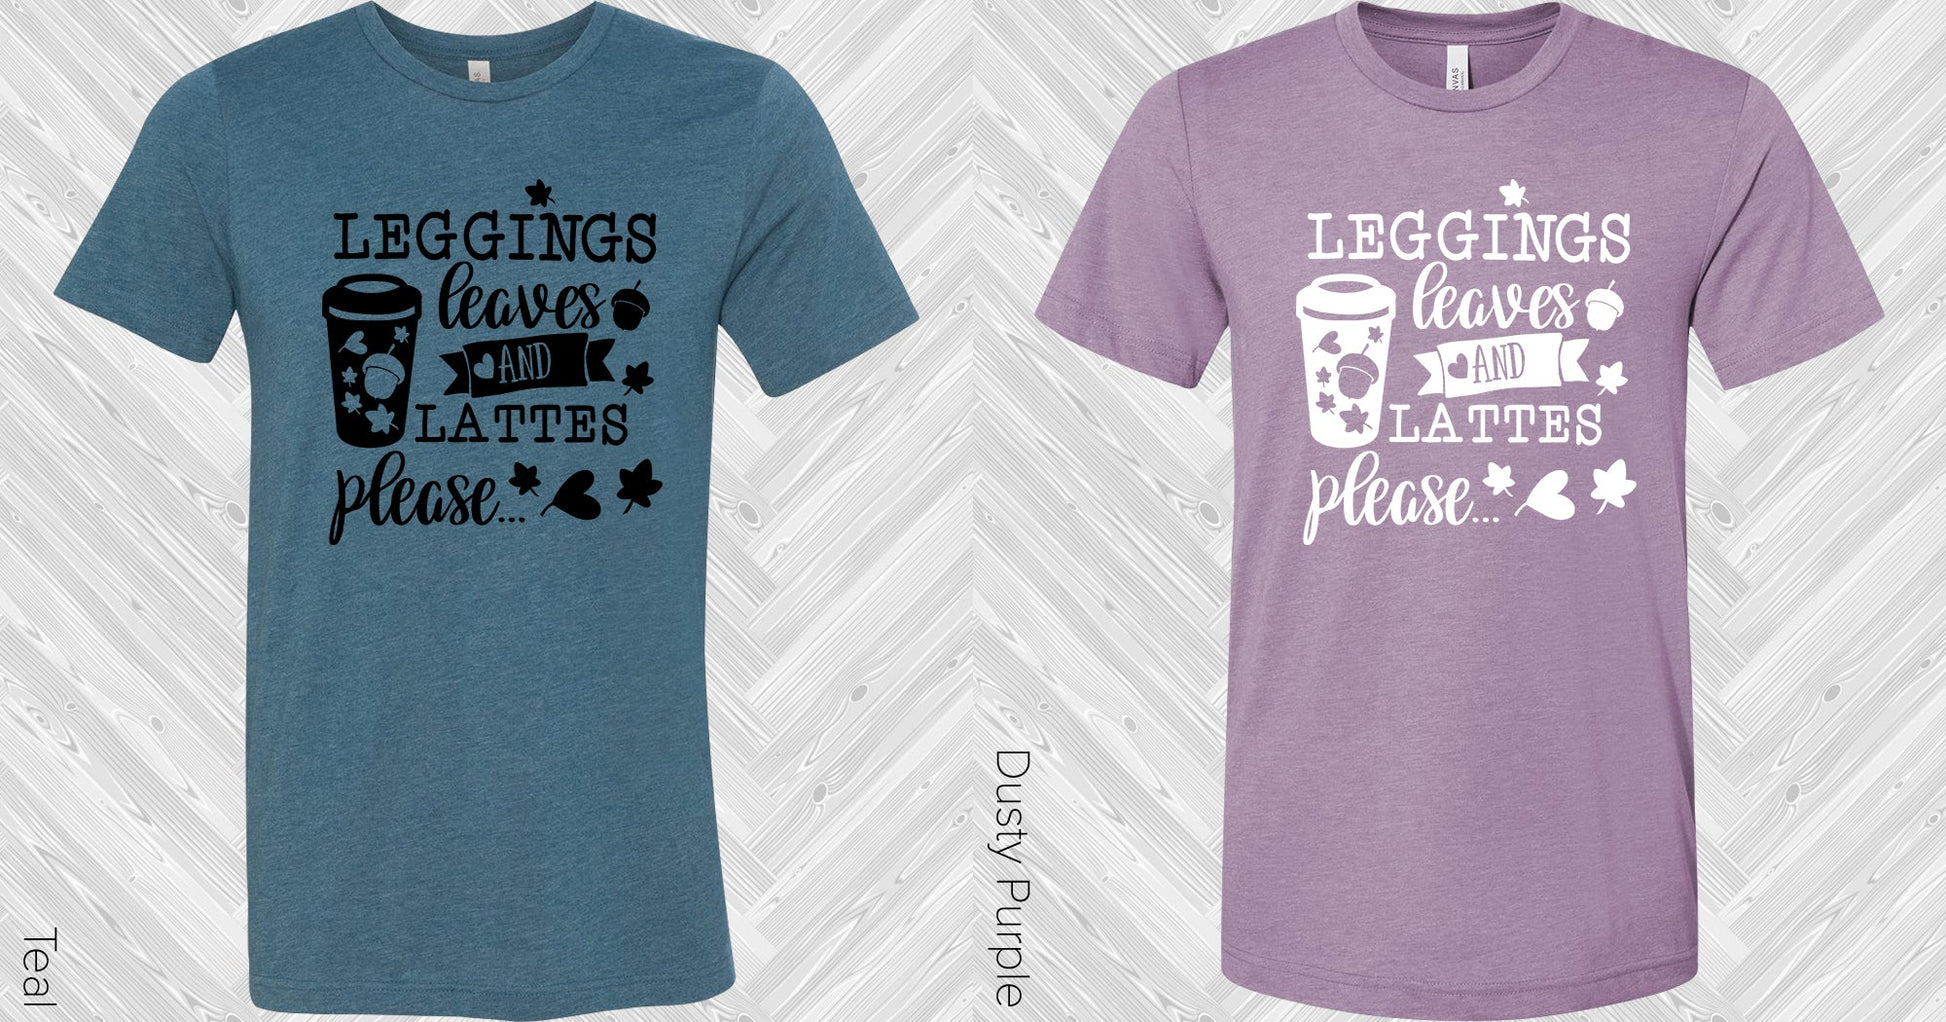 Leggings Leaves And Lattes Please Graphic Tee Graphic Tee